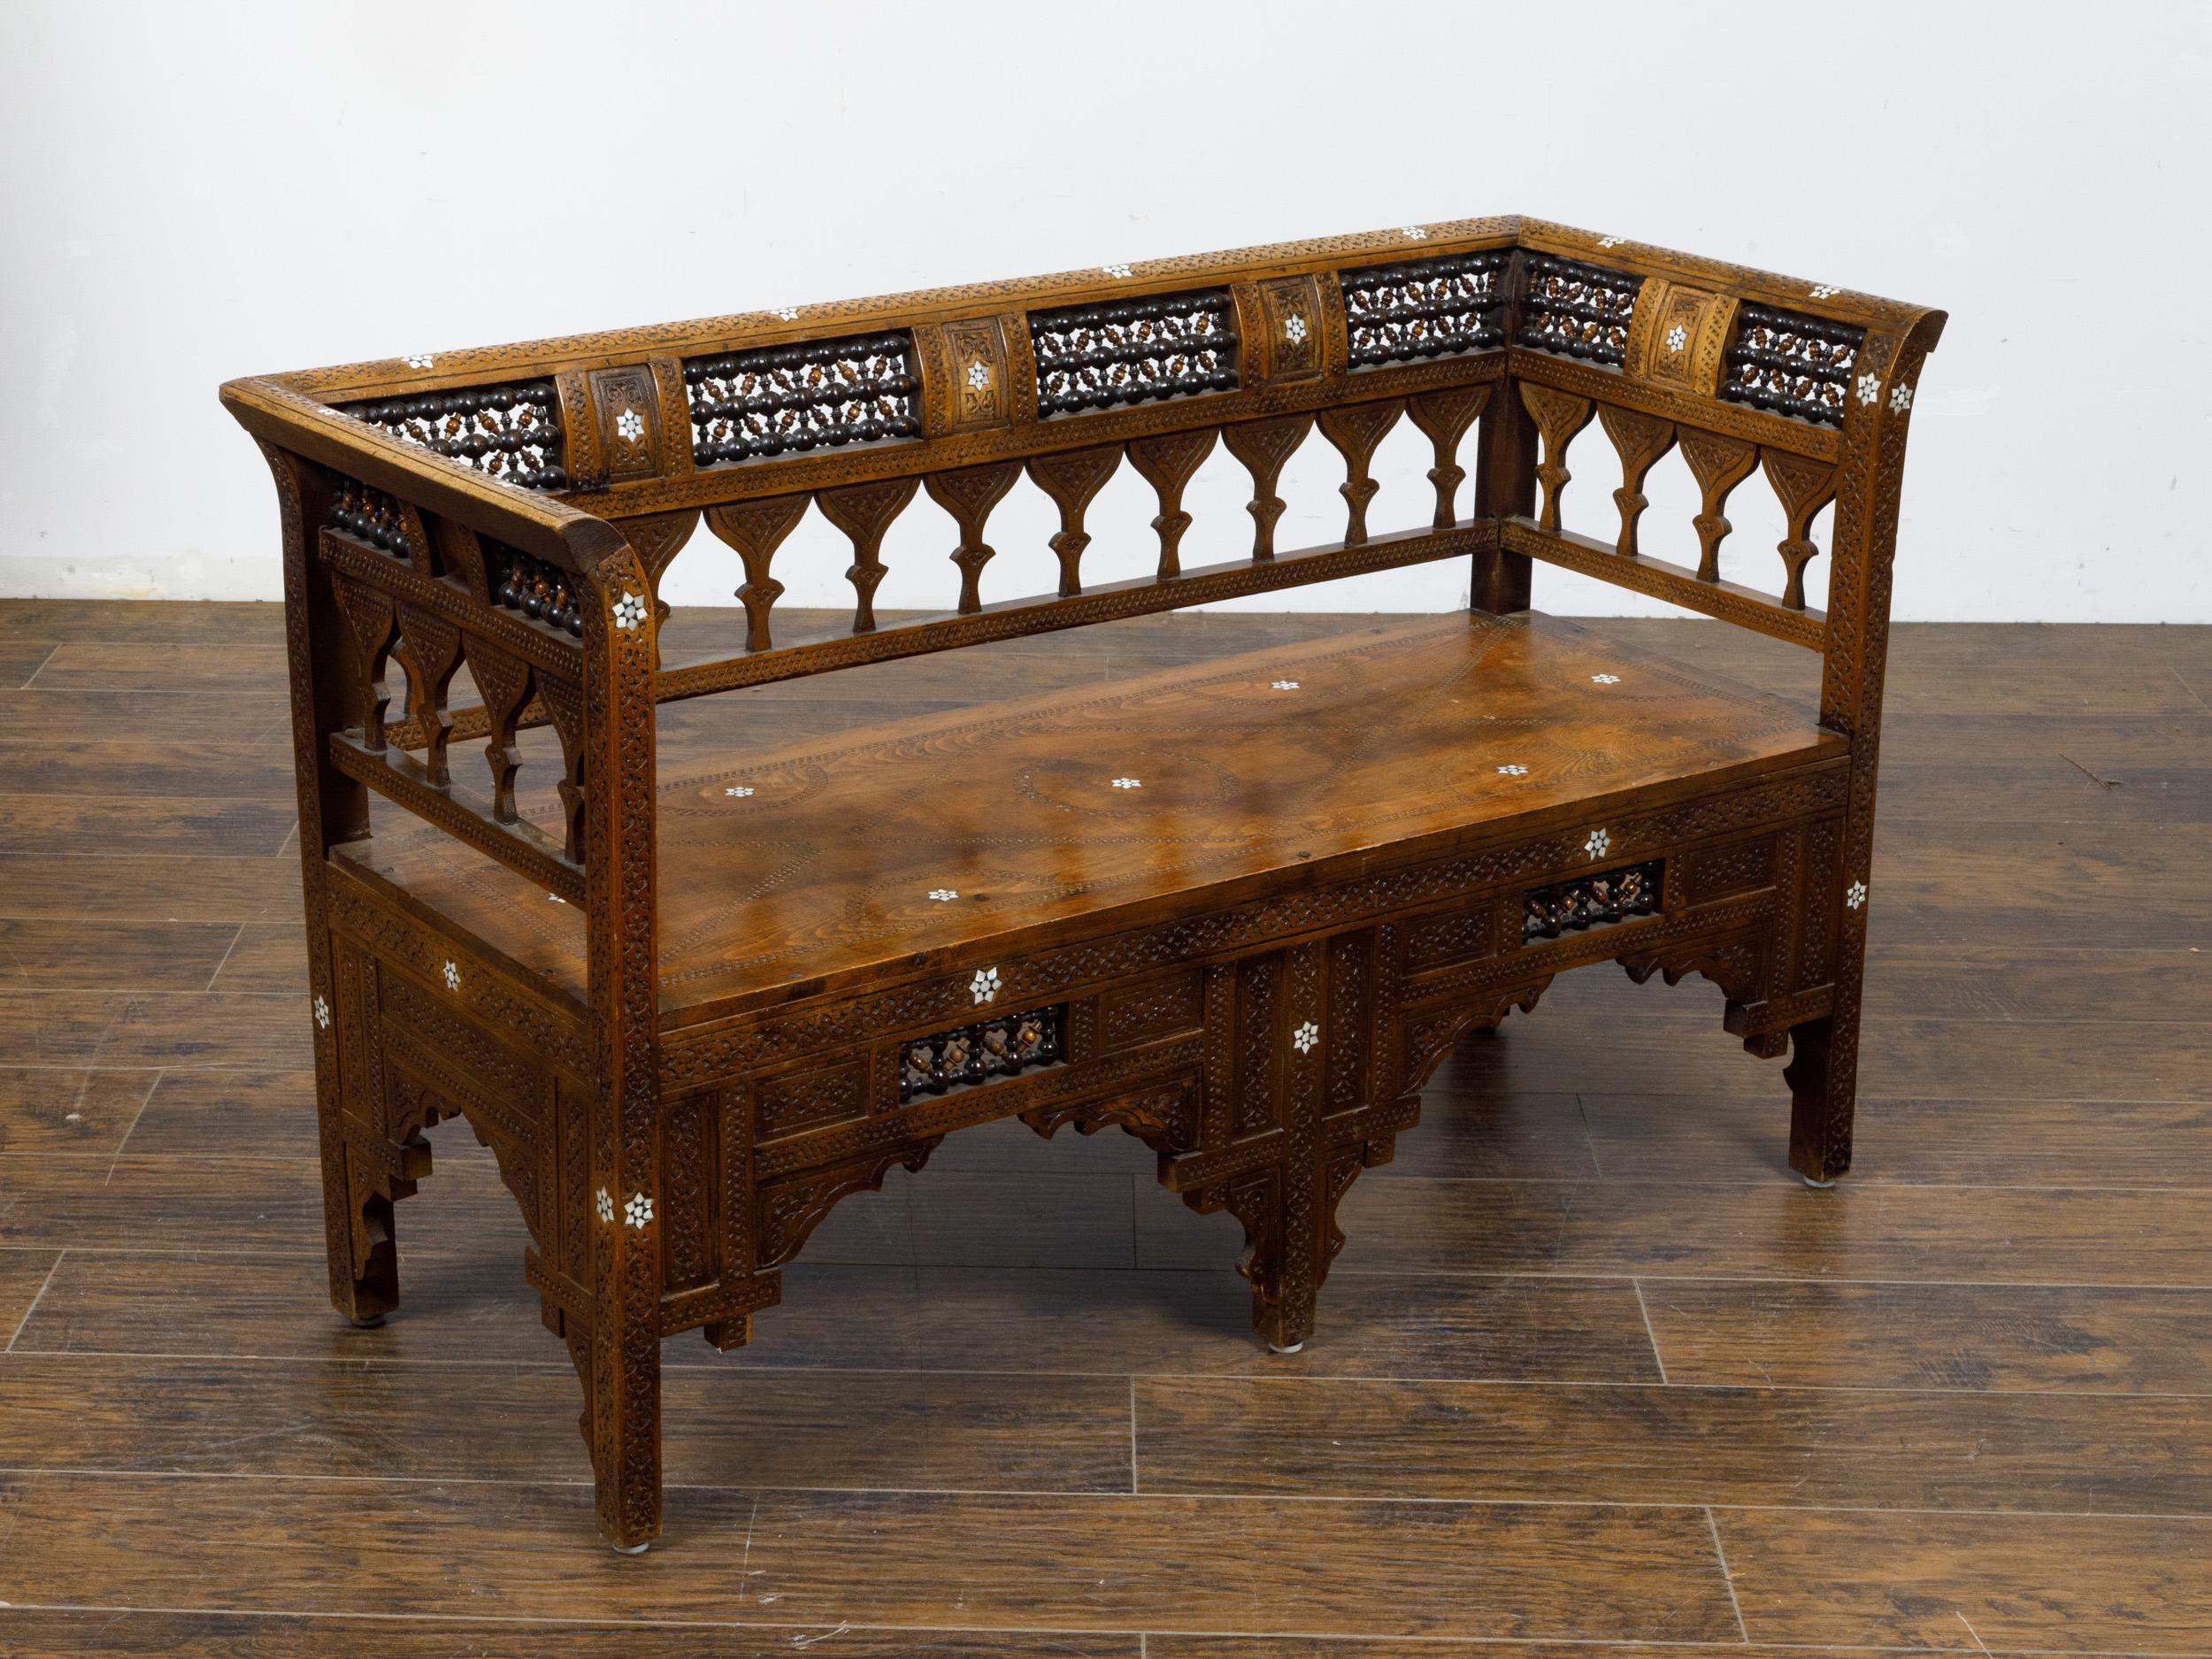 Moroccan 1900s Bench with Arching Backrest and Mother-of-Pearl Star Inlay For Sale 2